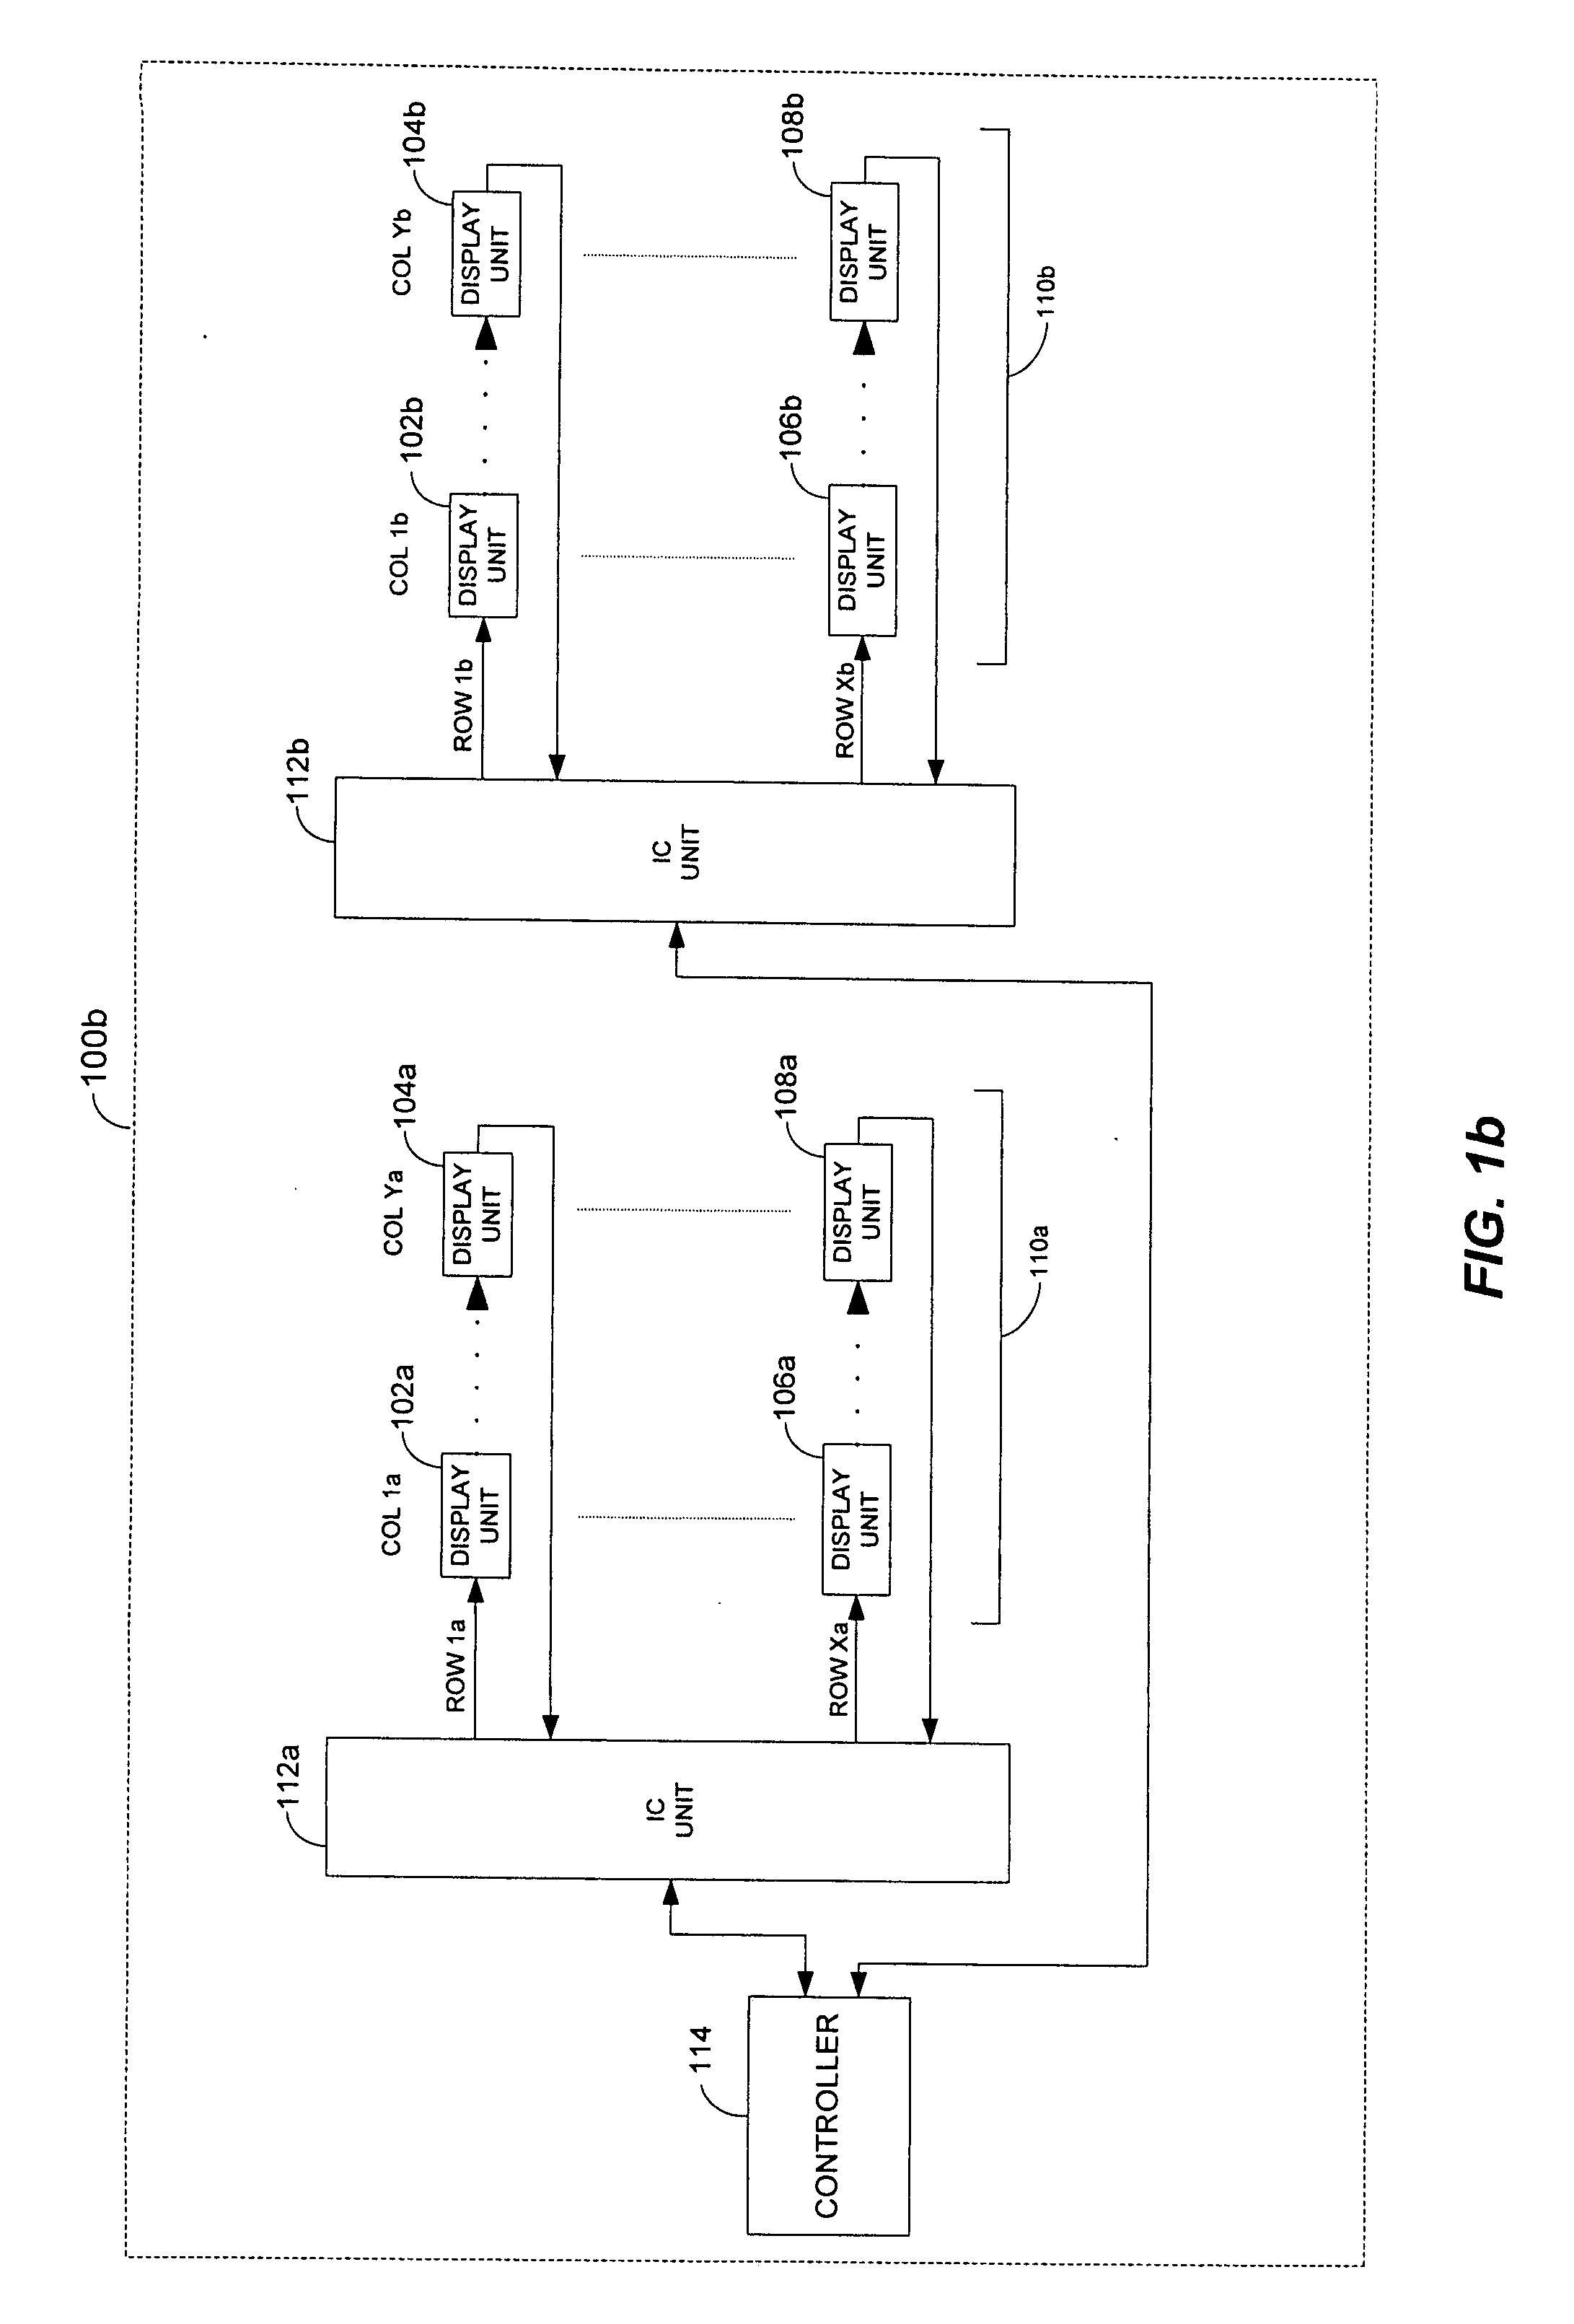 Dynamic message sign display panel error detection, correction, and notification